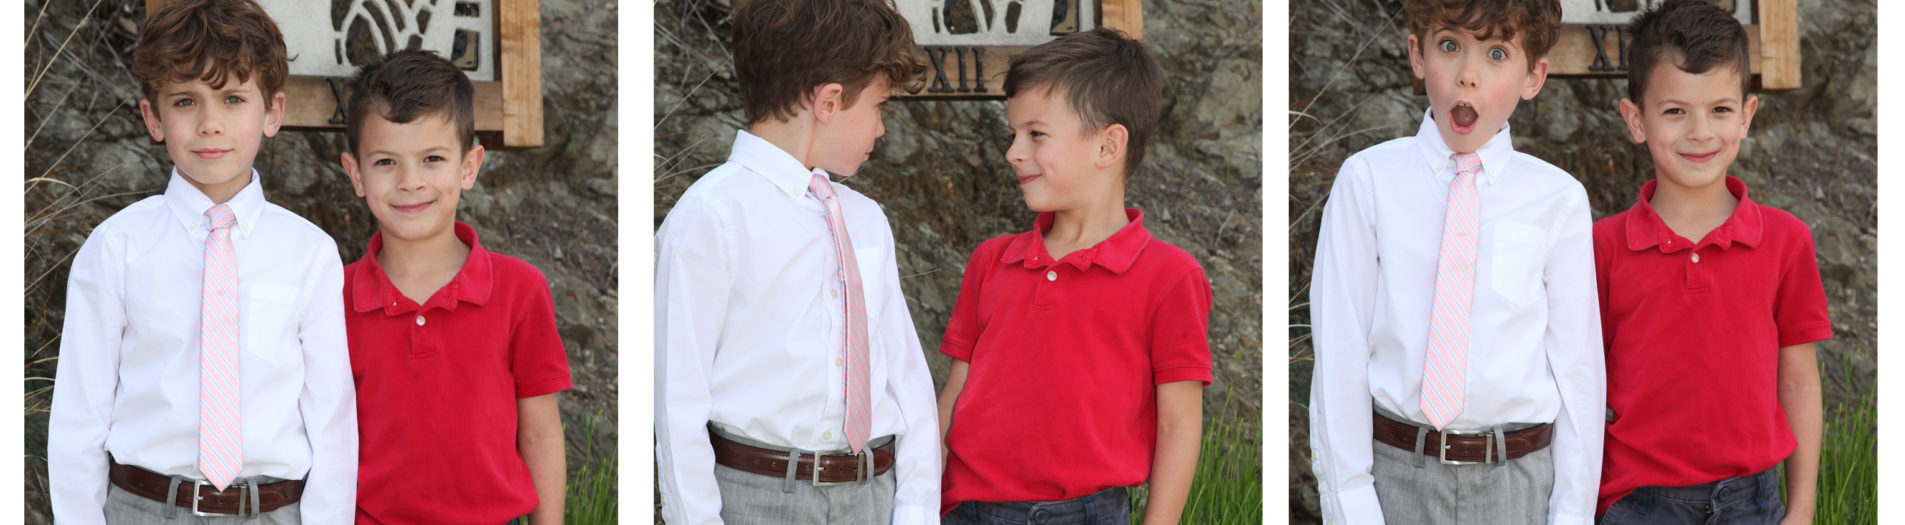 Why Cousins Matter in a Family | Outtakes & First Communion Portraits